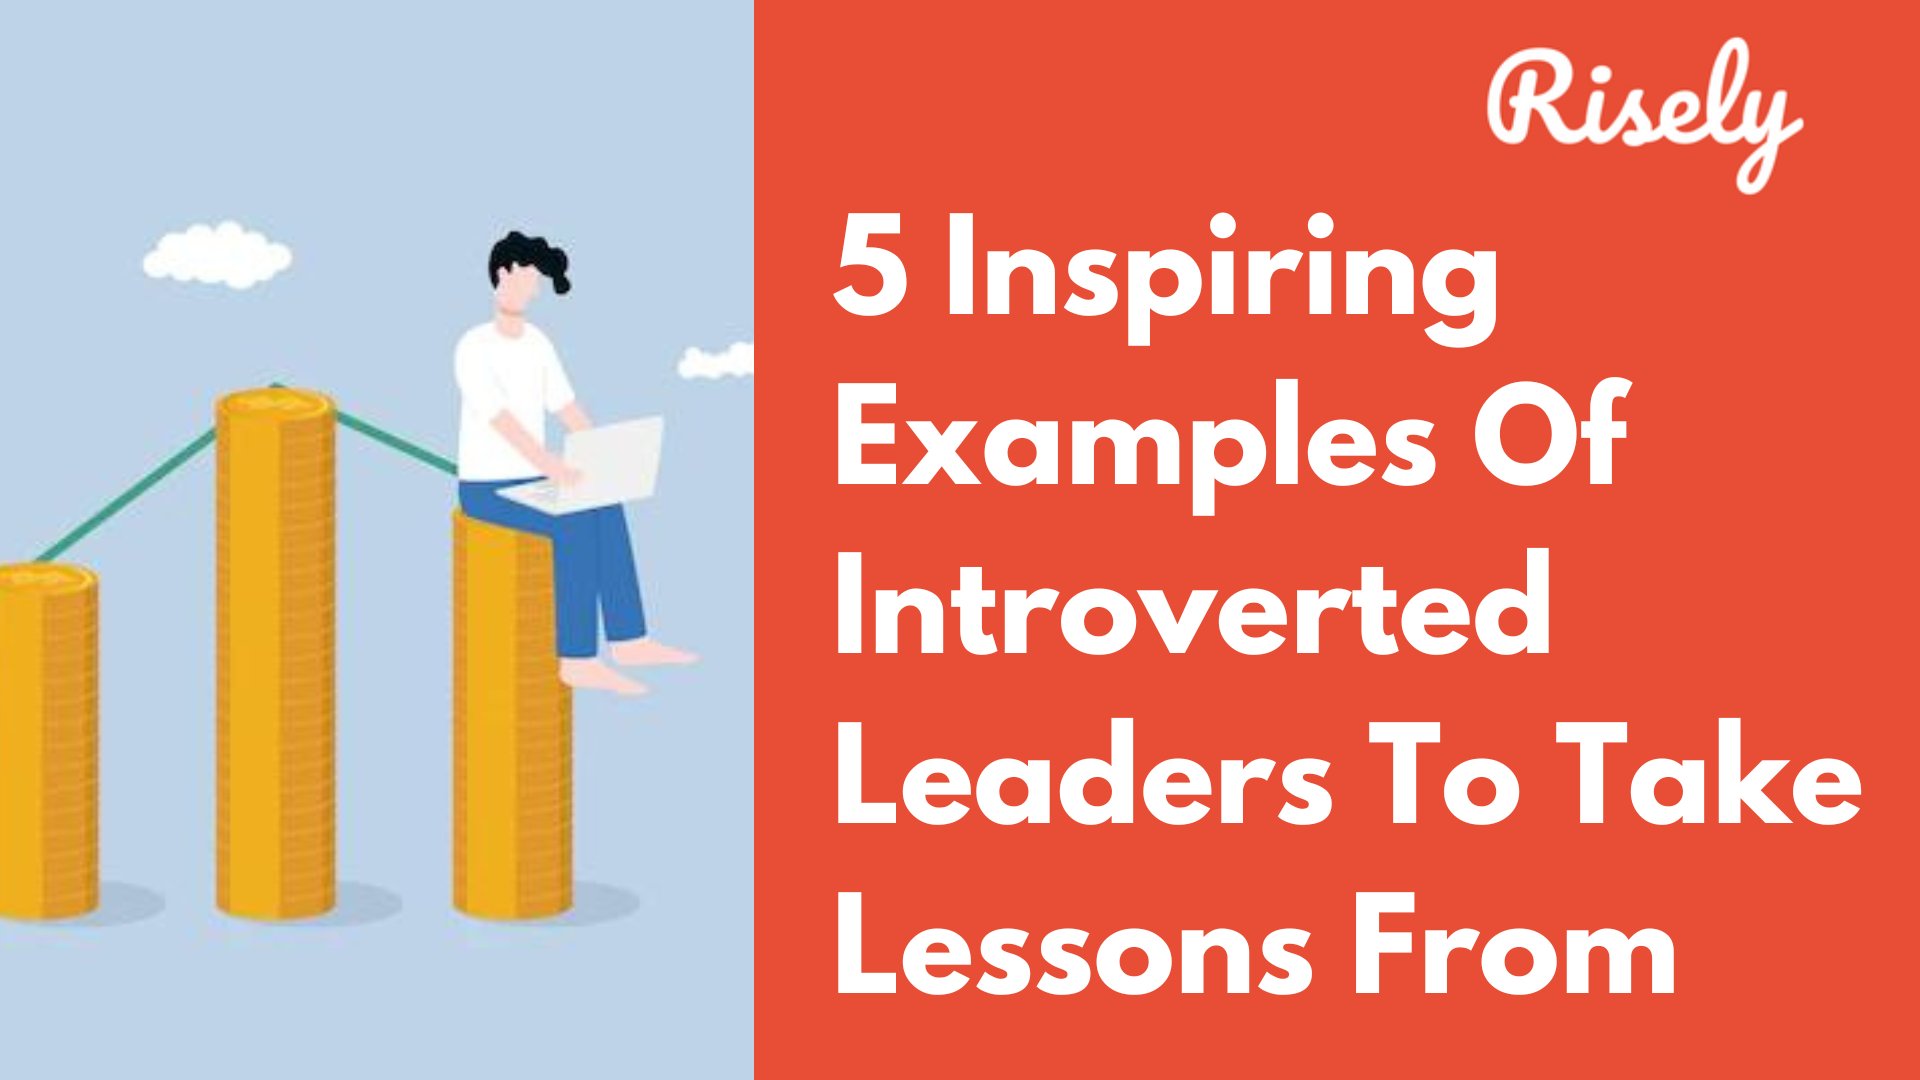 5 Inspiring Examples Of Introverted Leaders To Take Lessons From